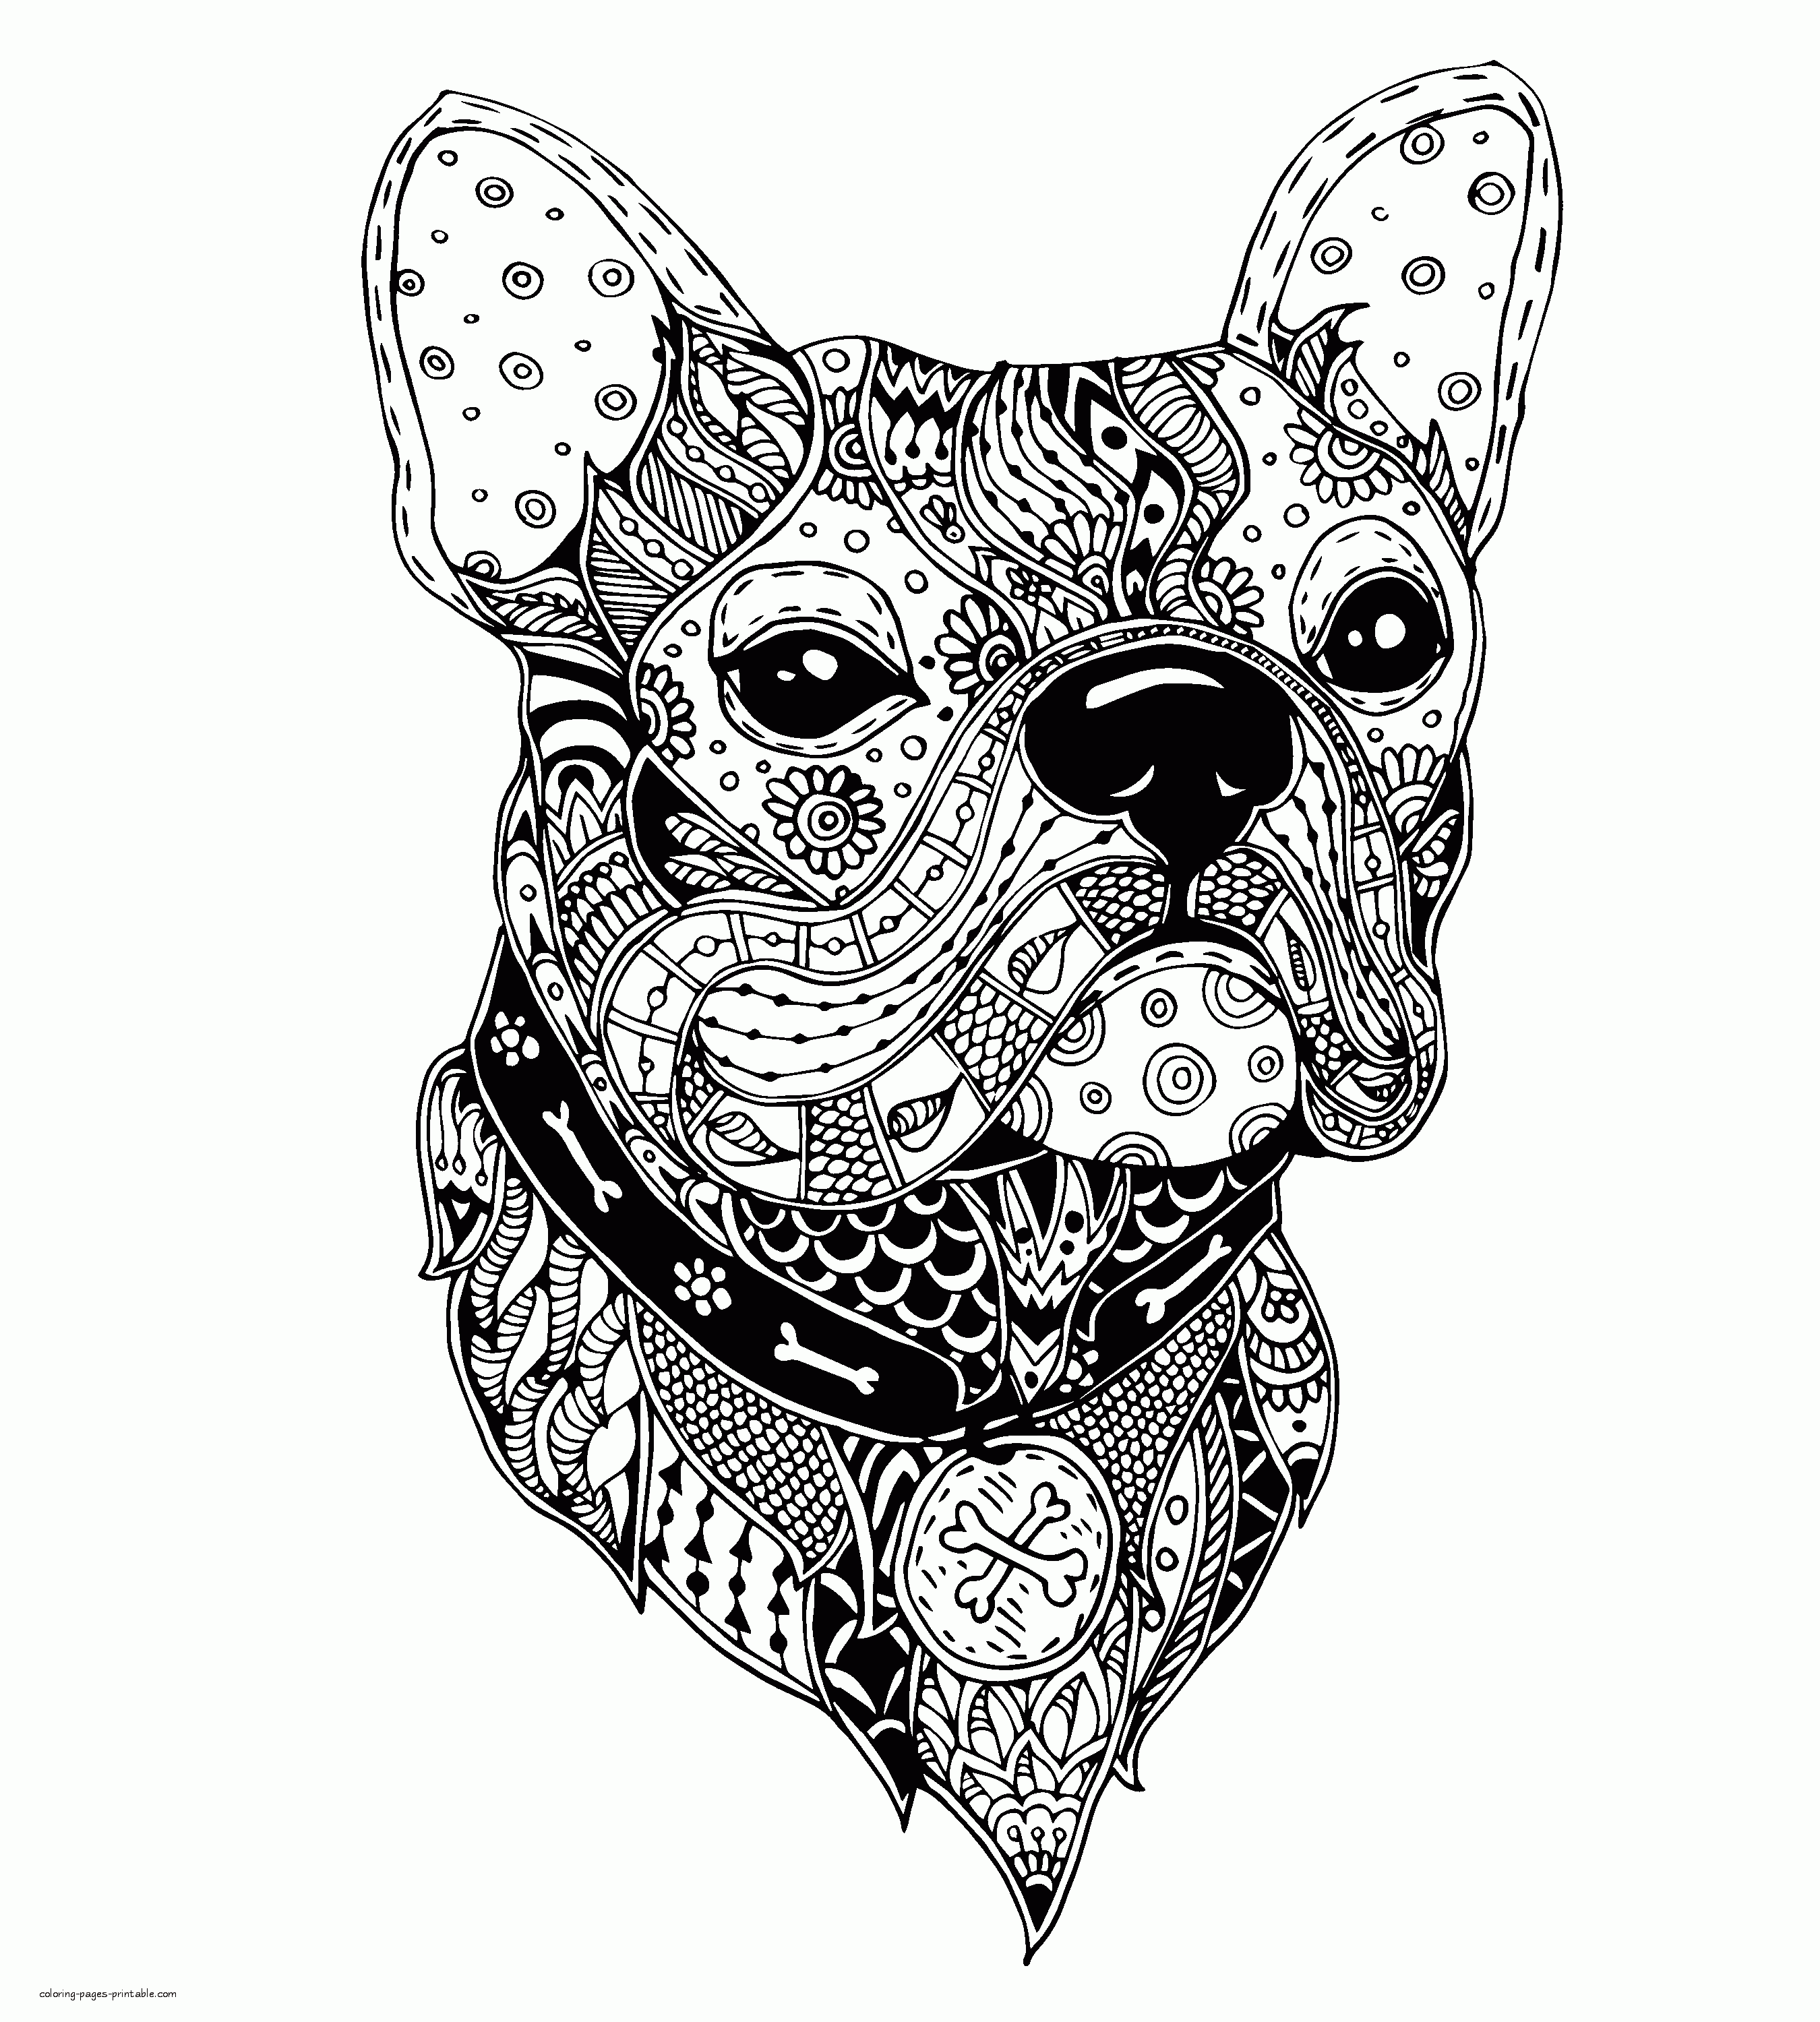 Complex Animal Coloring Pages    COLORING PAGES PRINTABLE.COM